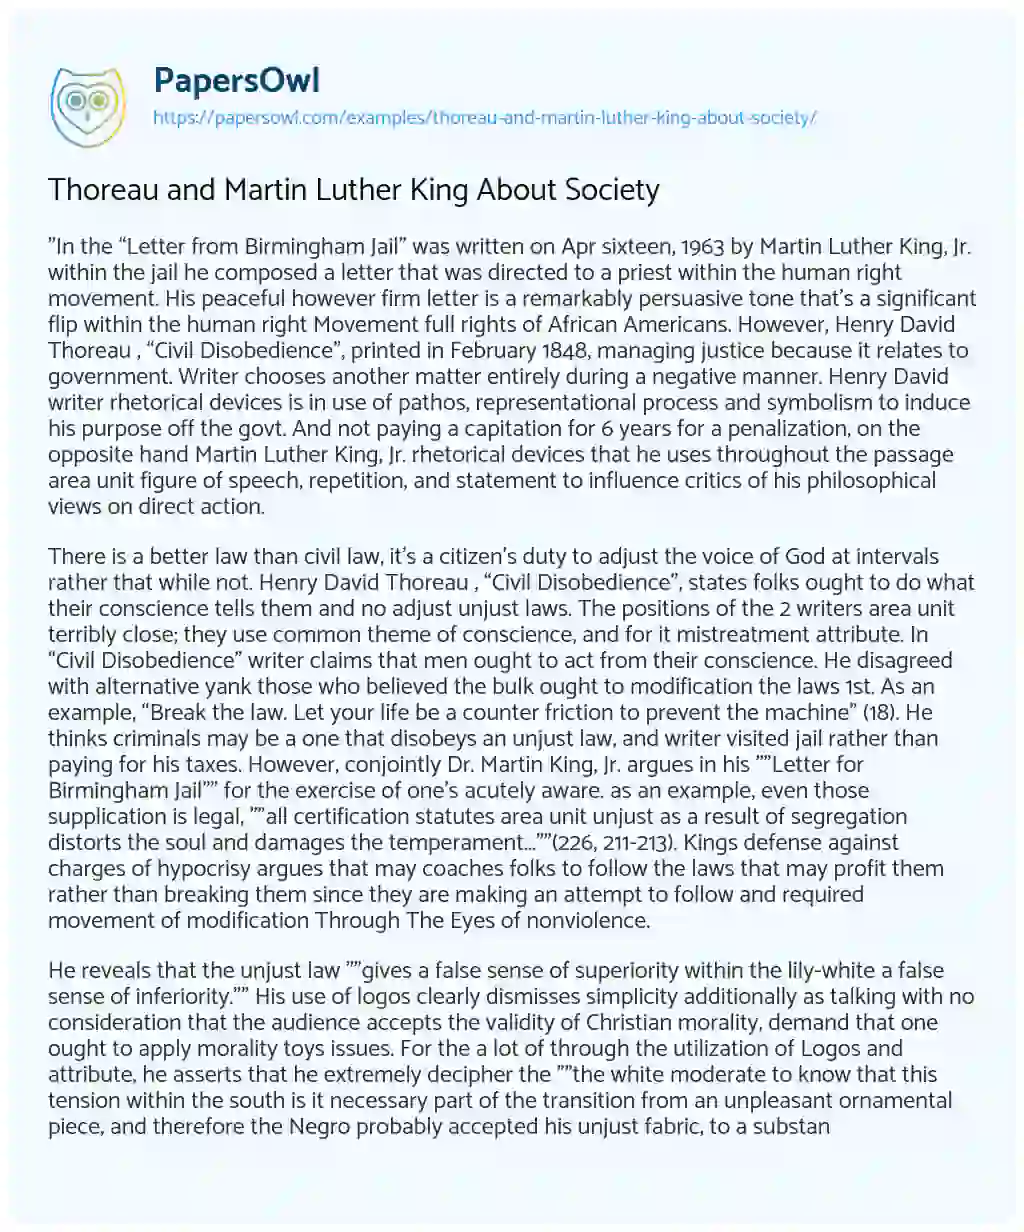 Essay on Thoreau and Martin Luther King about Society